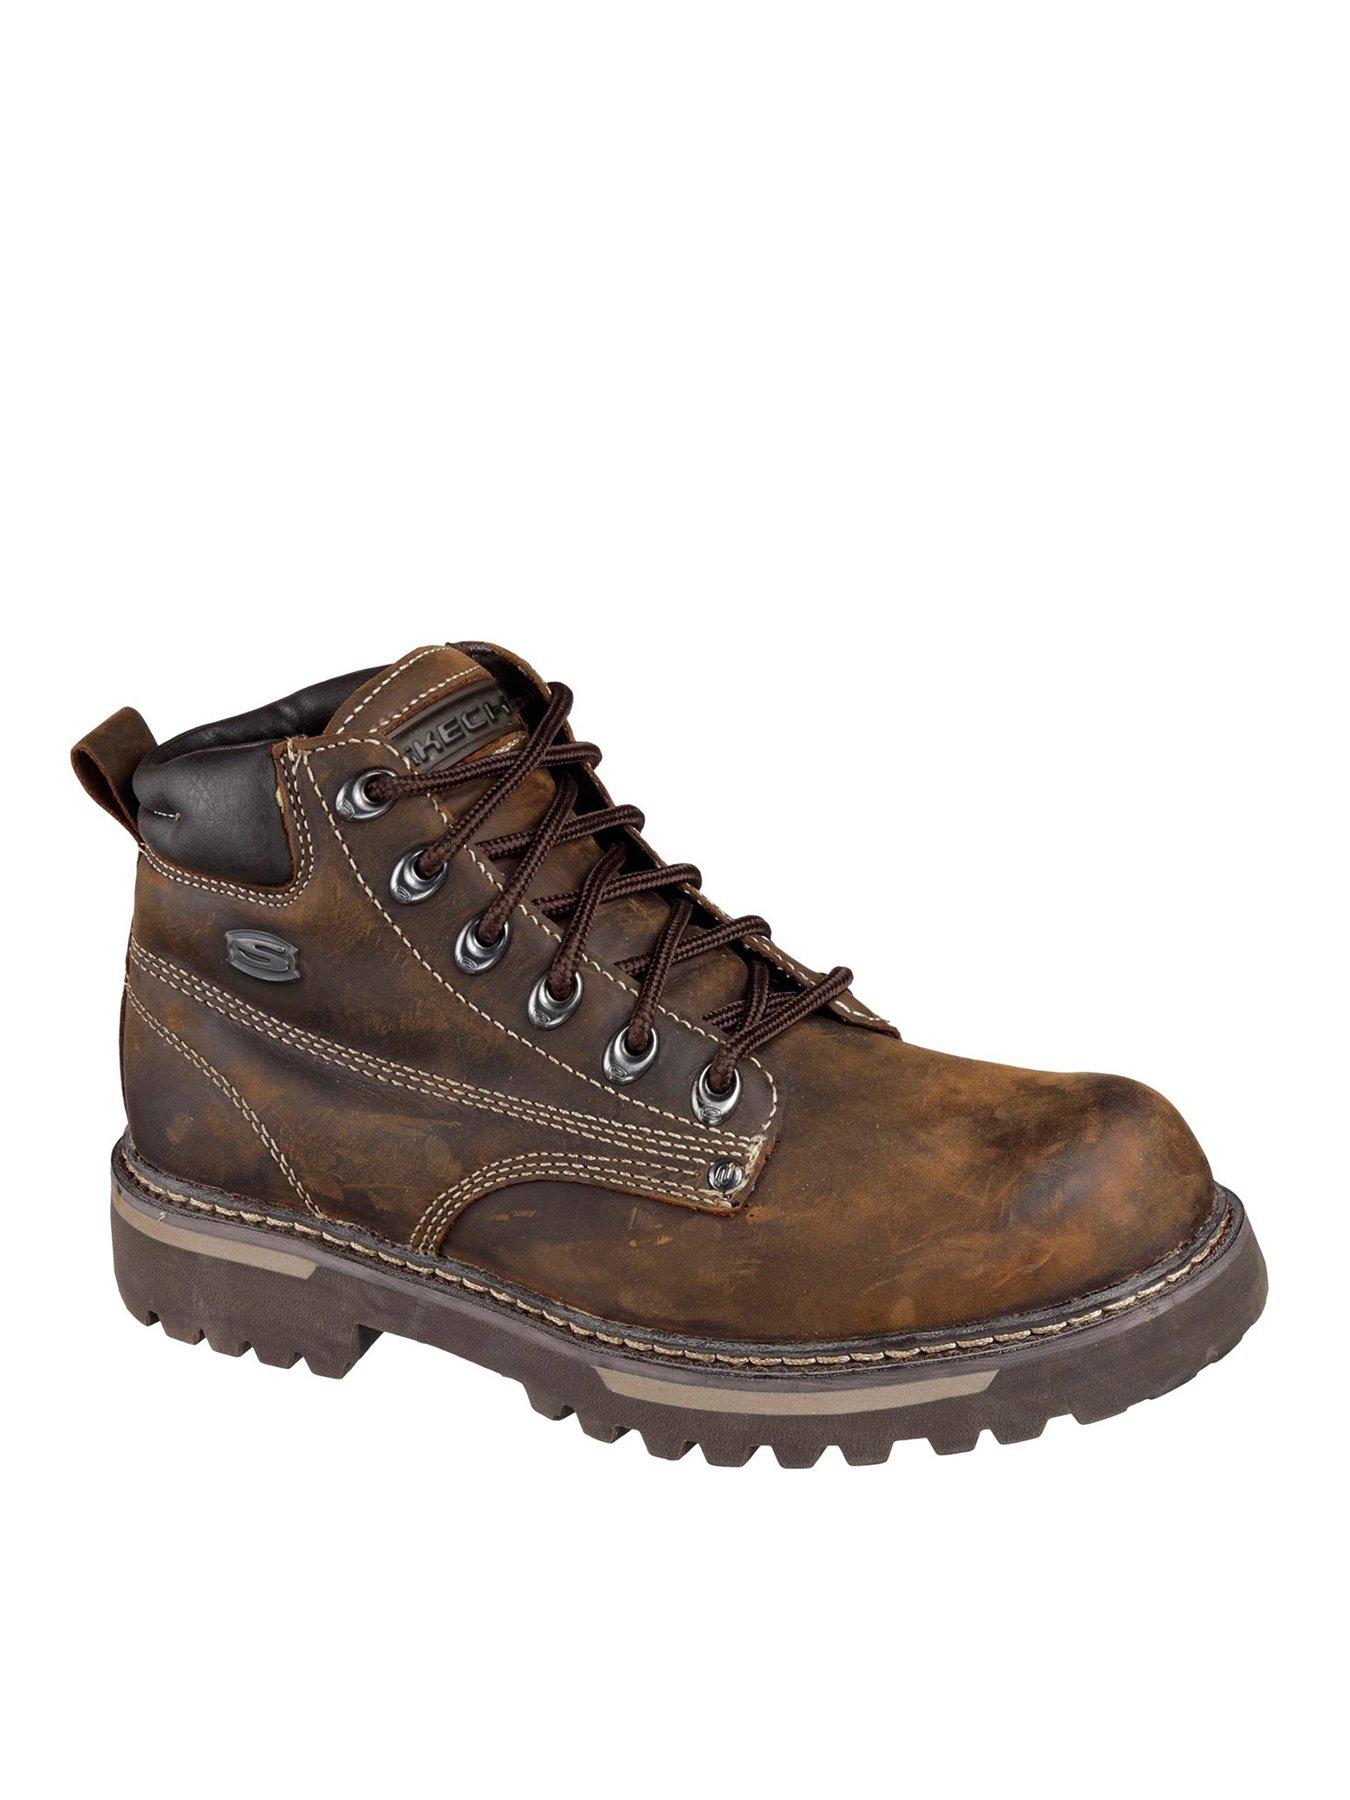 Skechers Cool Cat Bully 2 Workwear - Brown | littlewoods.com